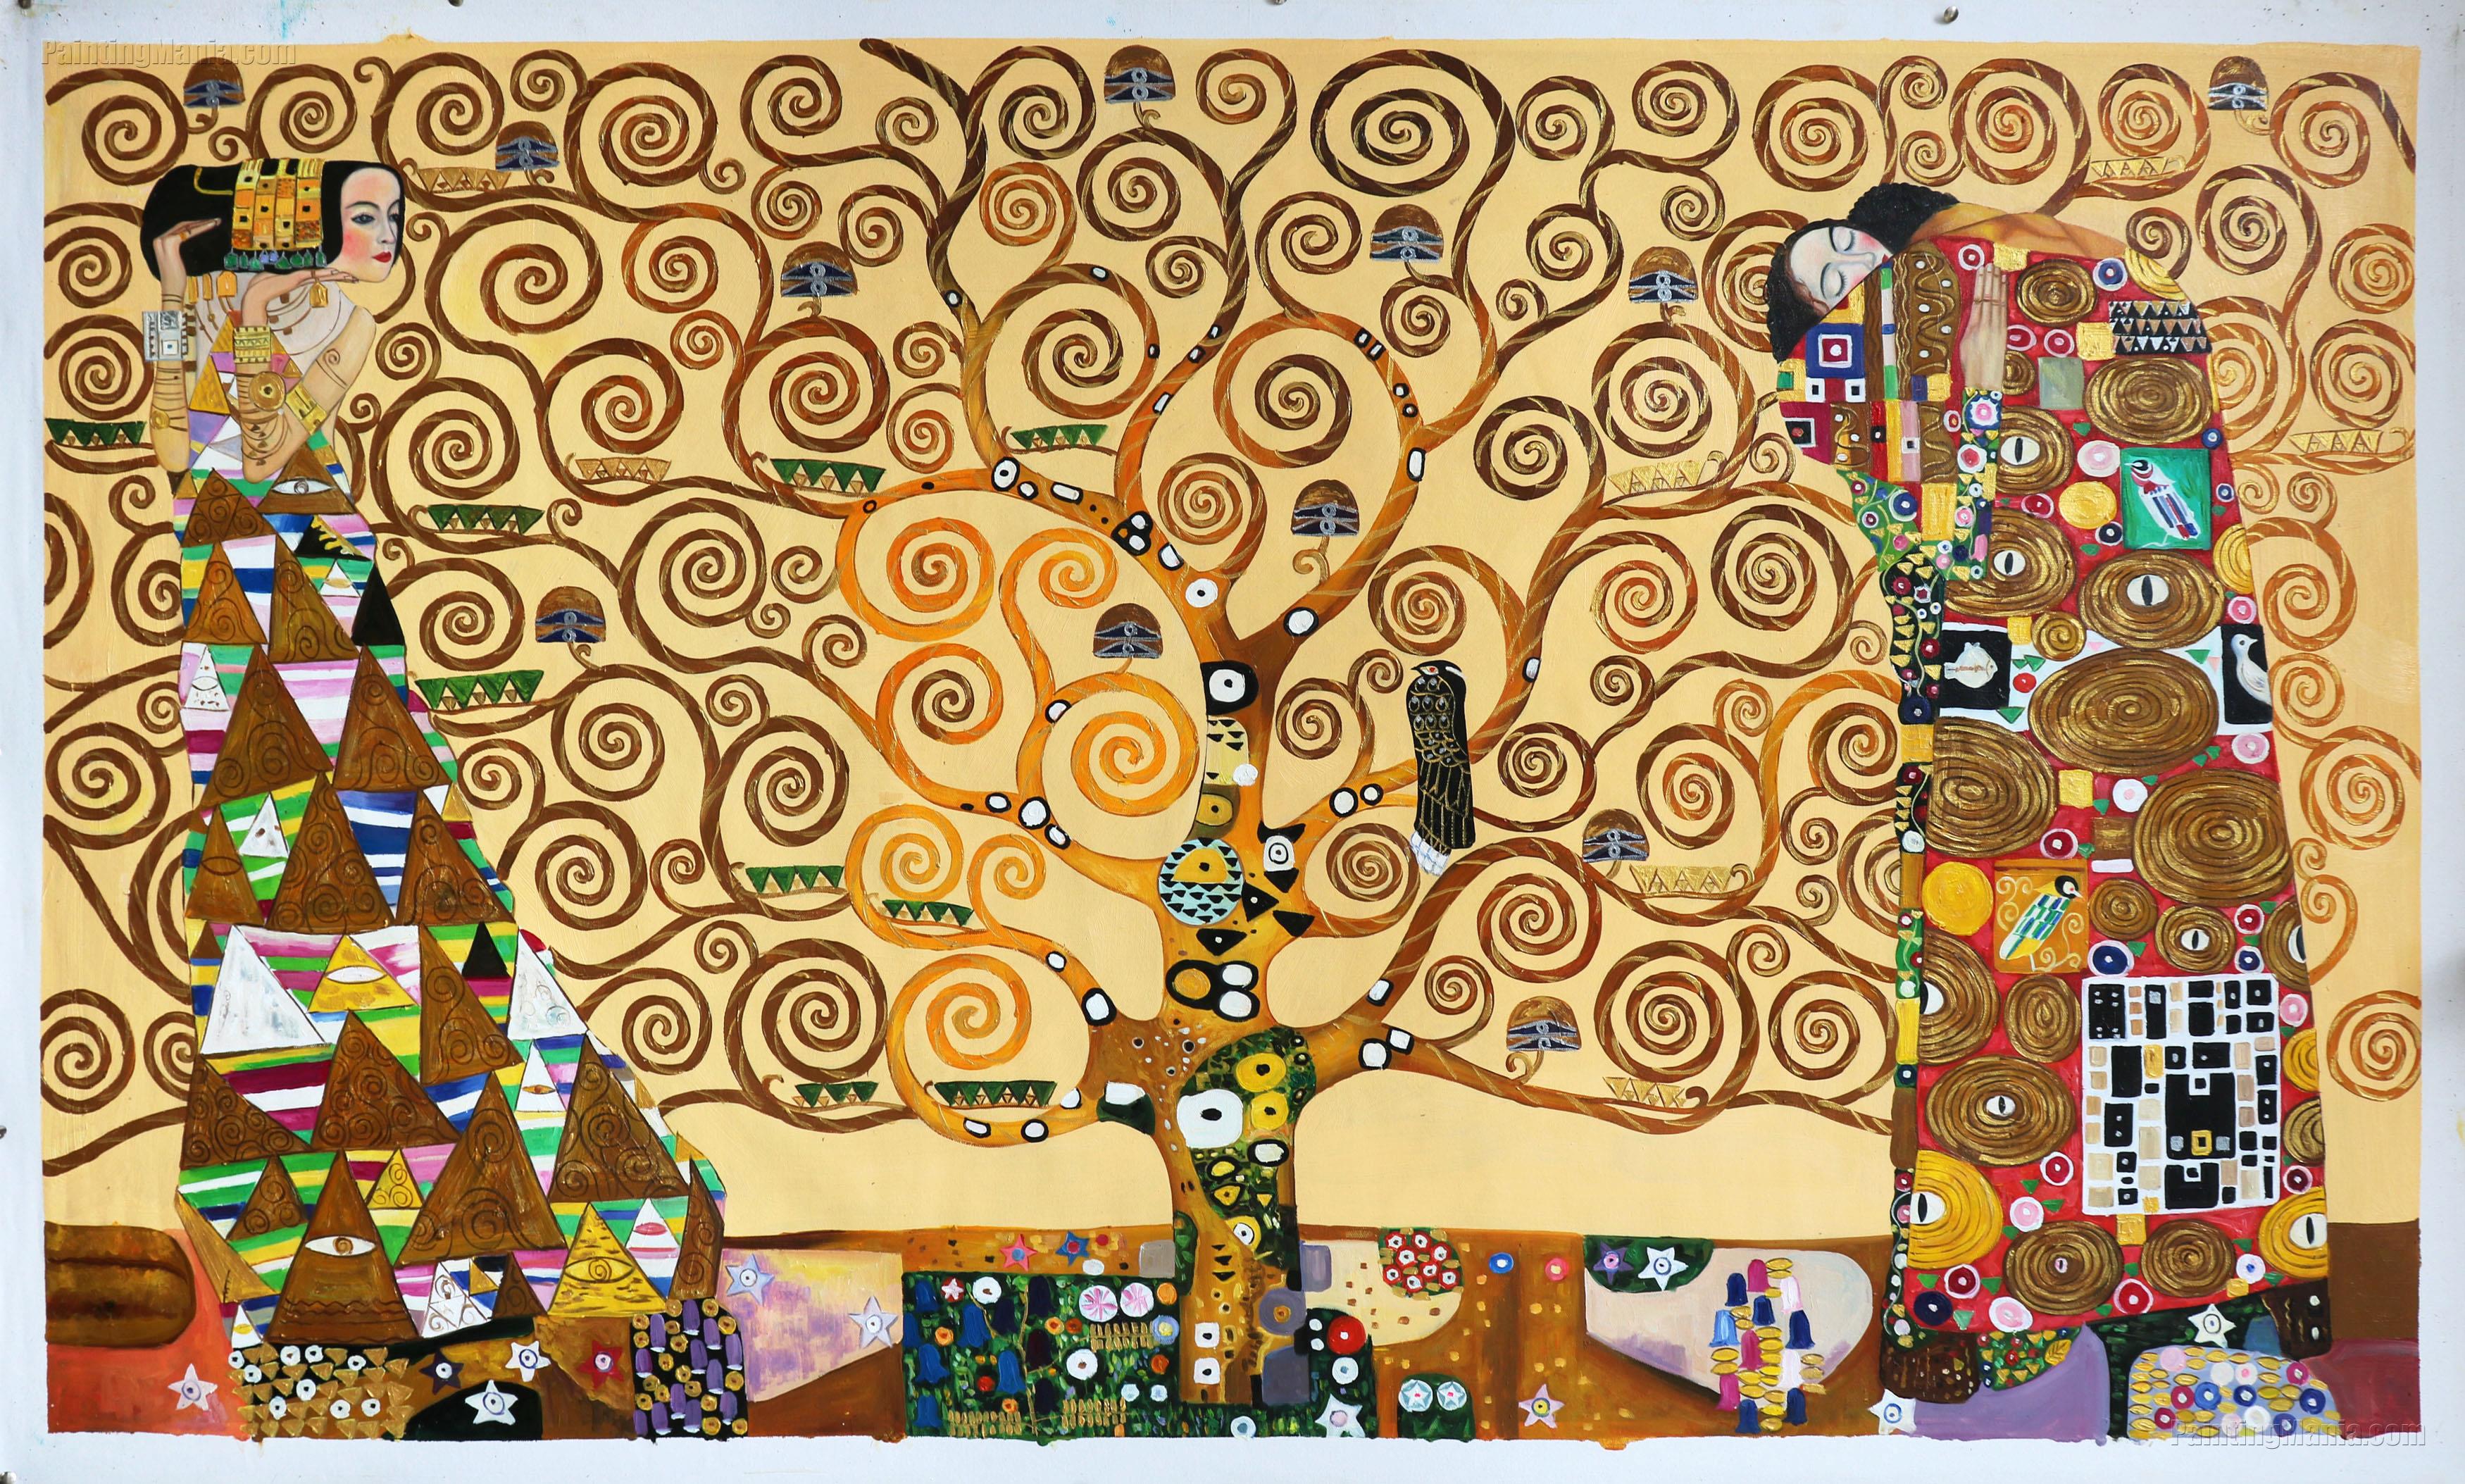 famous tree of life painting